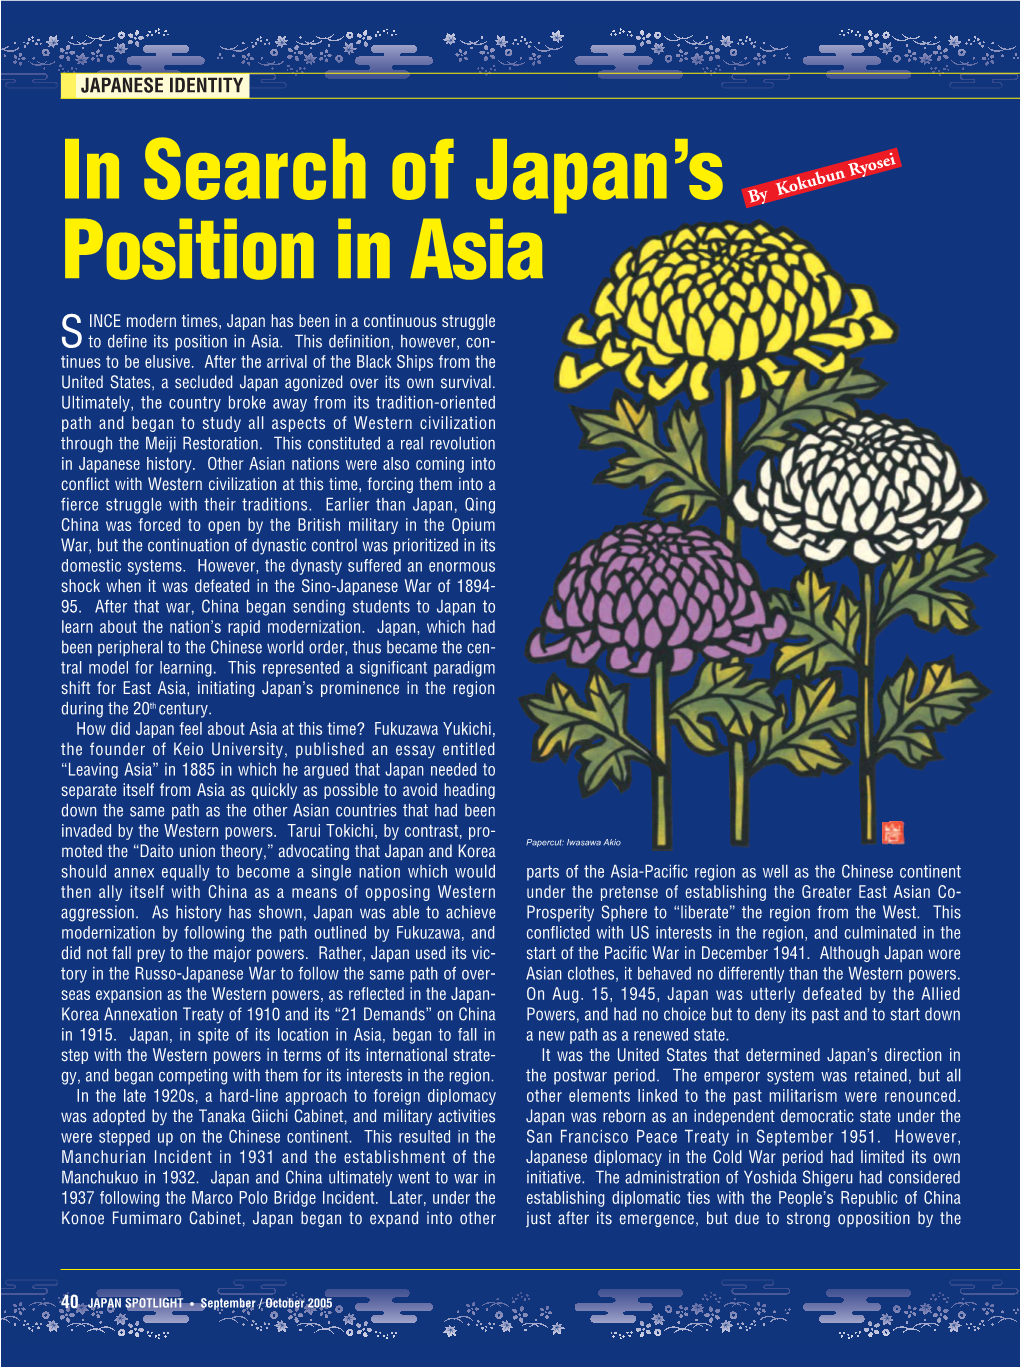 In Search of Japan's Position in Asia